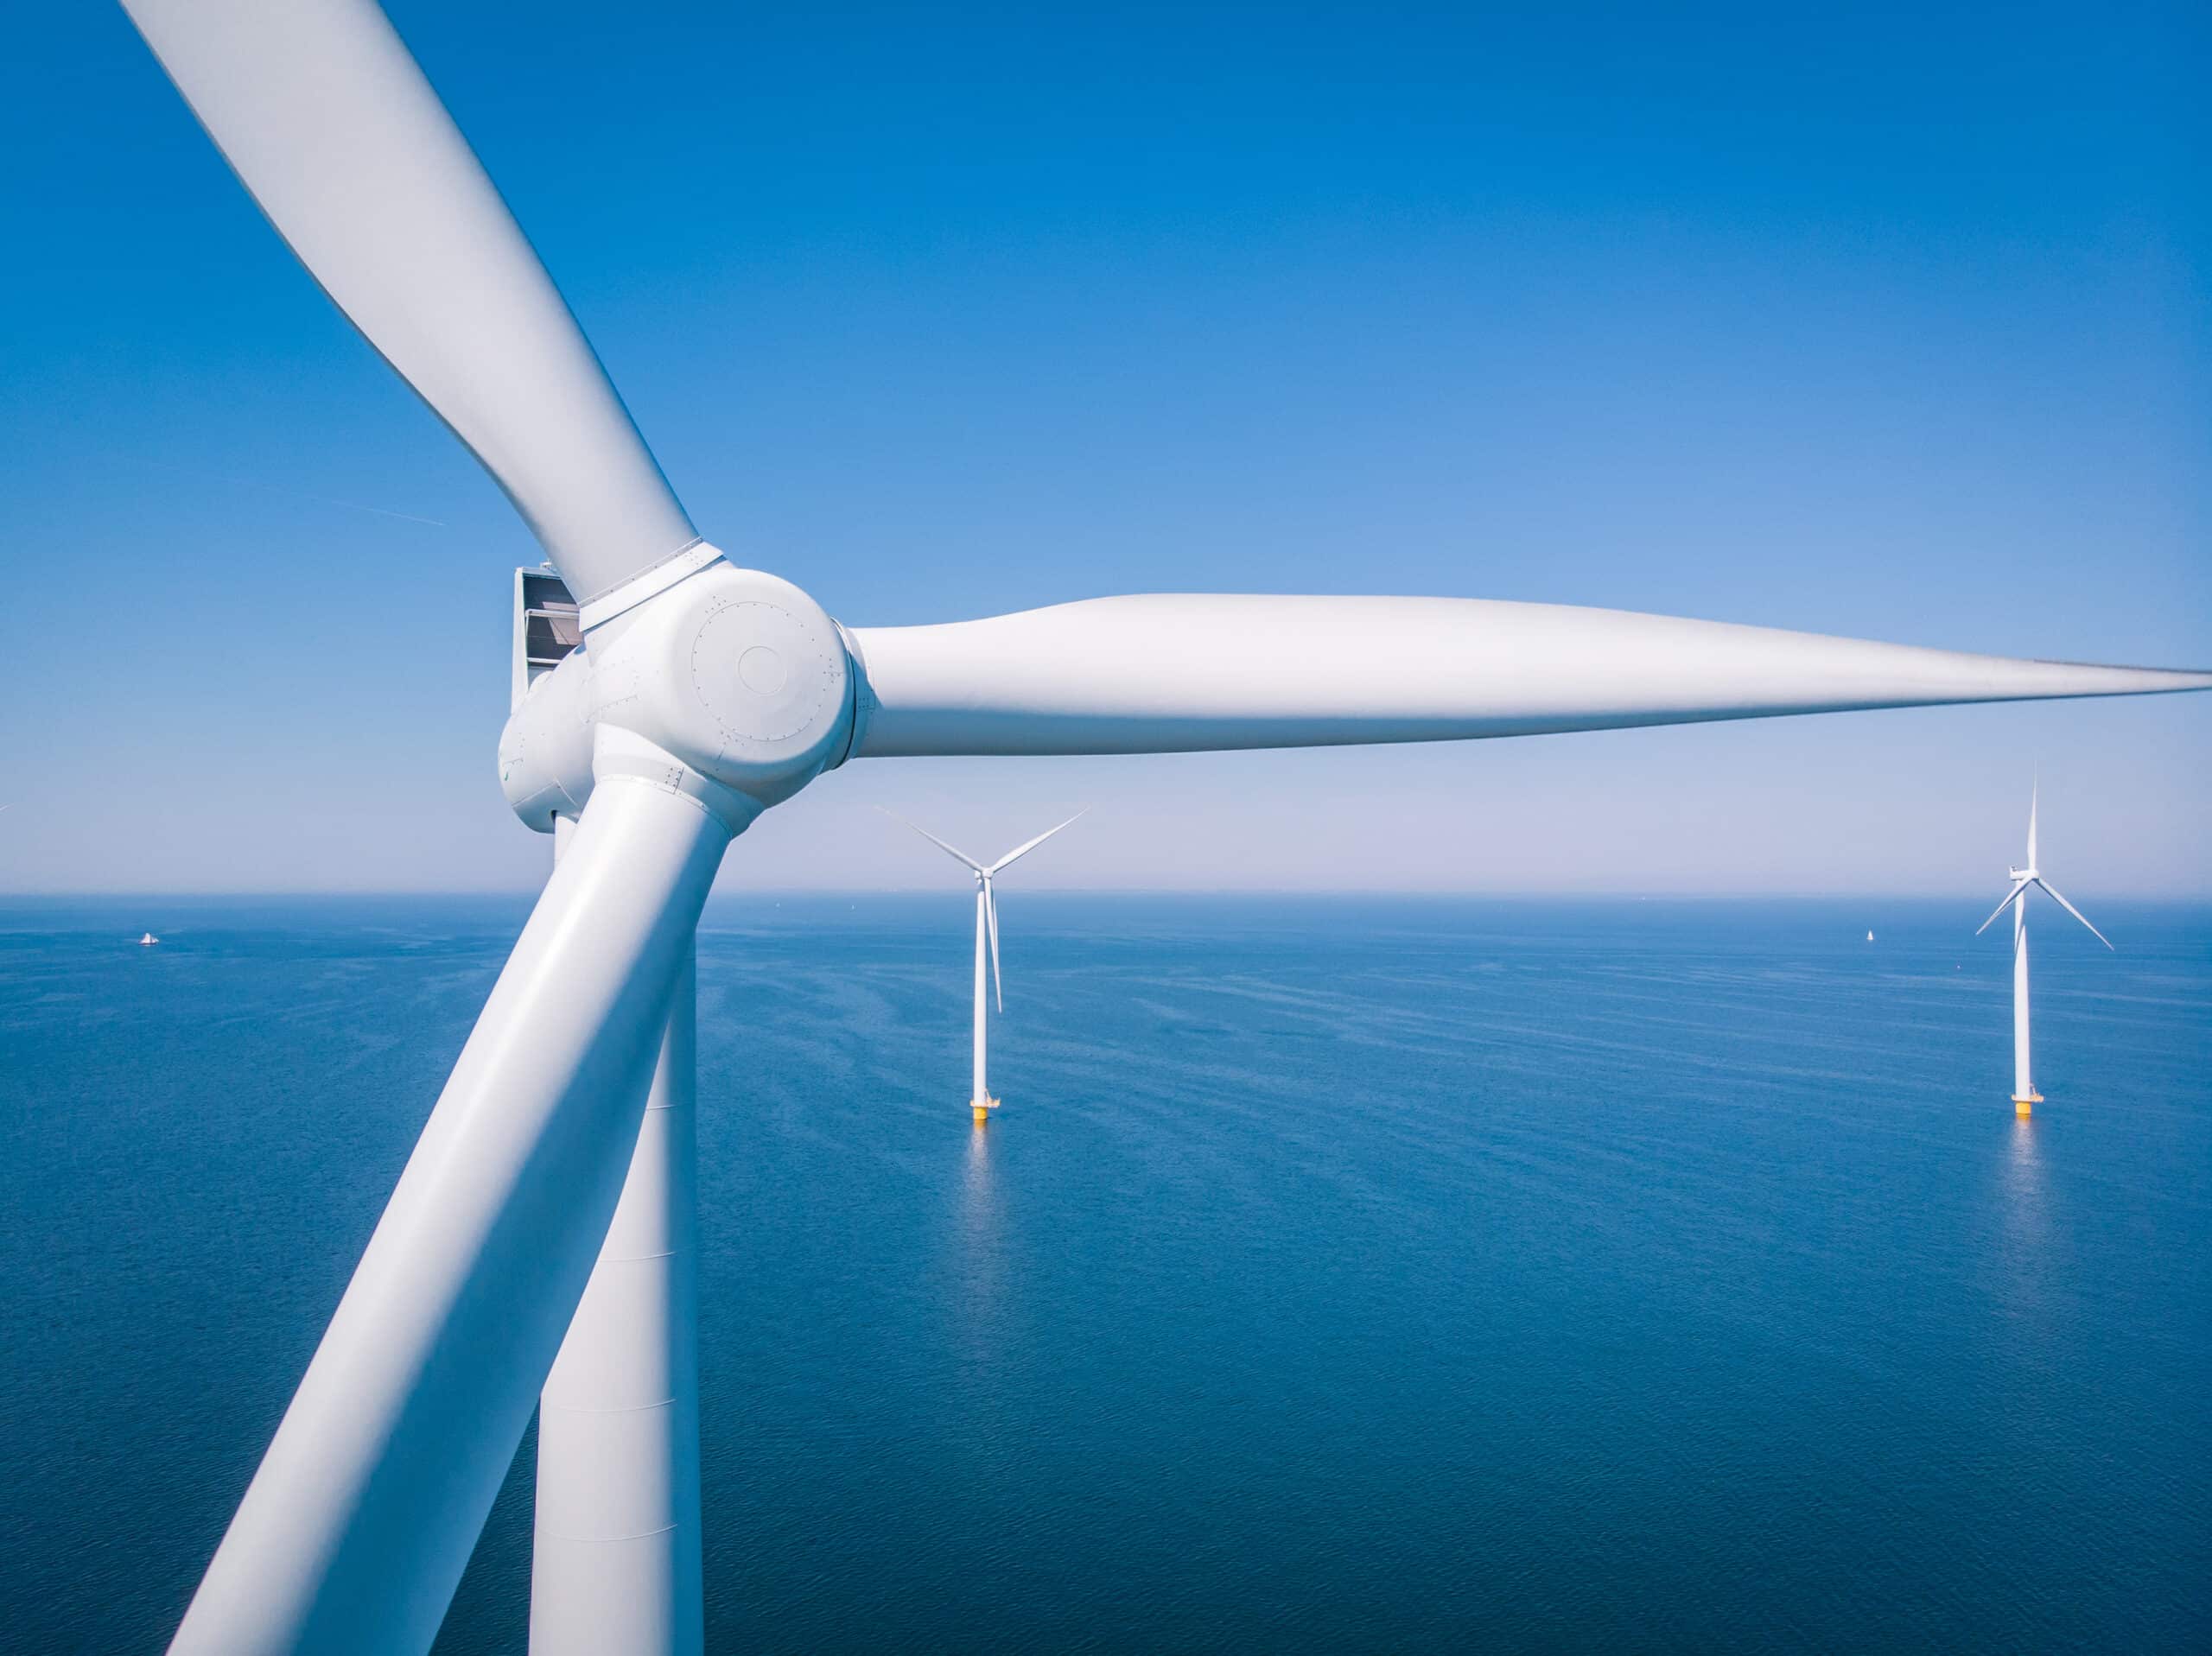 Nova Scotia sets five-gigawatt target for offshore wind power by 2030